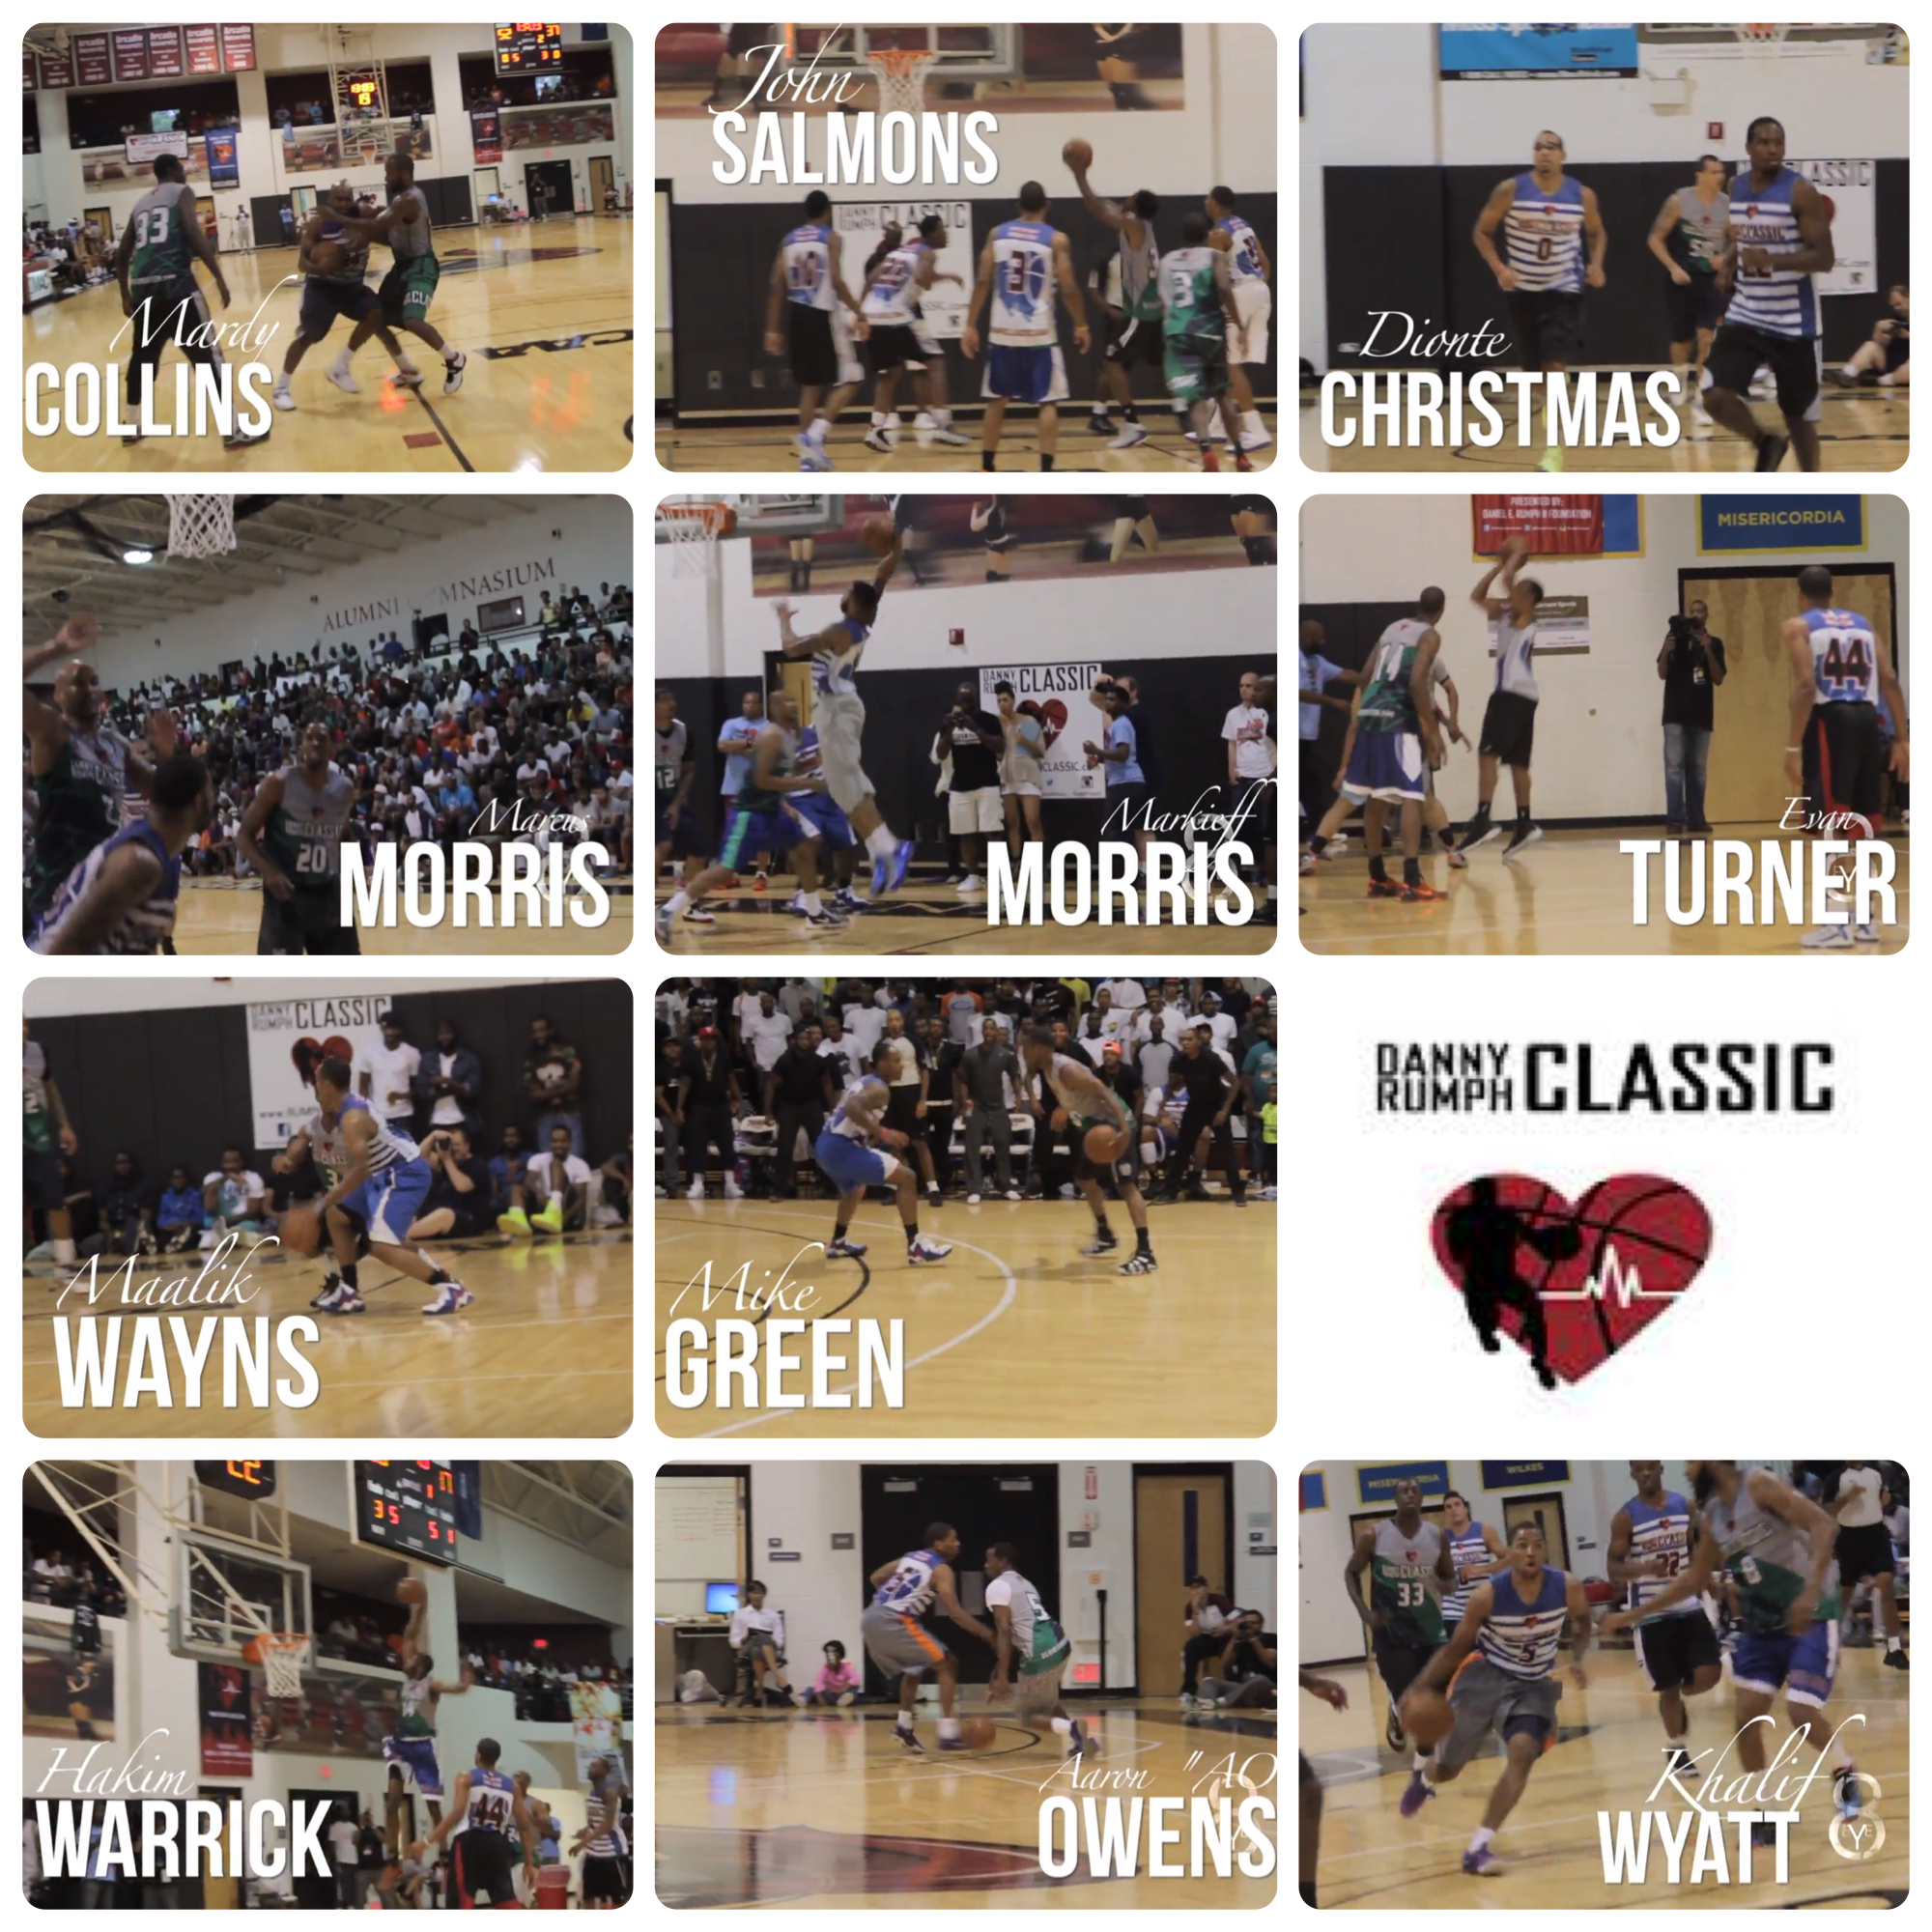 danny-rumph-classic-2013-day-1-highlights-video-HHS1987-2013 Danny Rumph Classic 2013 (Day 1 Highlights) (Video)  